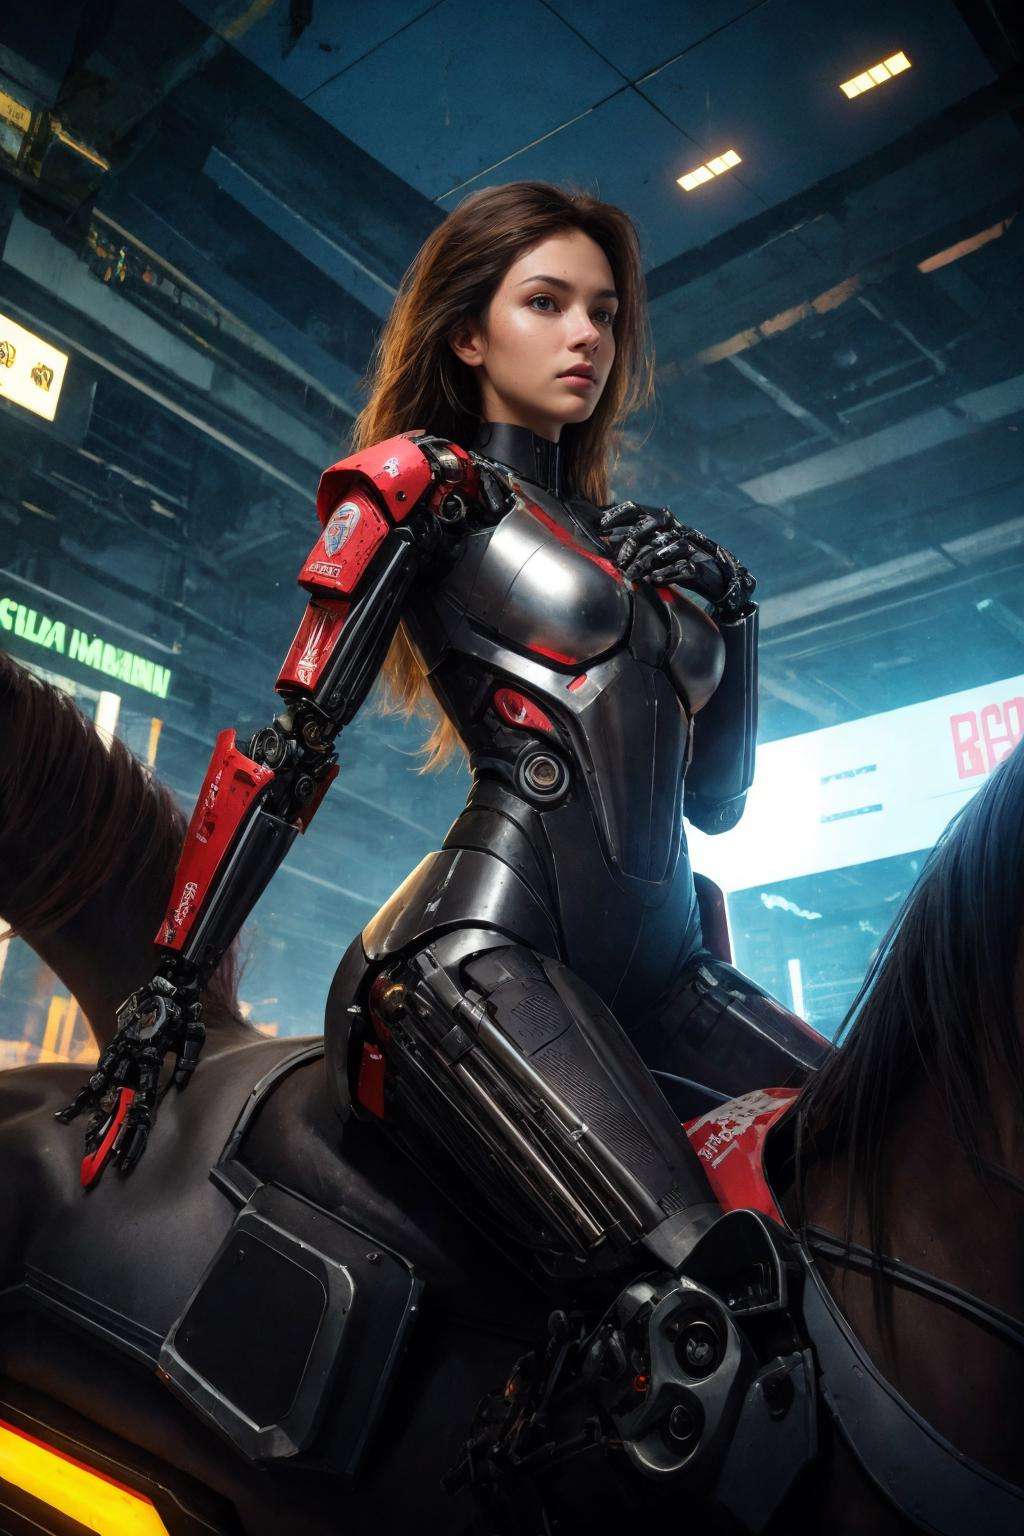 realistic, detailed, best illustrations, intricate detailsbreak,1girl, solo, long hair, extremely beautiful, slender, tanned skin, small breast, detailed skin complexion, seductive face, nanosuit, bodyarmor, mechanical spine, mechanical arm, robotic armor, bodysuit, ((riding a horse)), open jacket, looking at viewerbreak,detailed background, futuristic, fantasy, brutalist architecture, sci-fi, cyberpunk, dystiopian, night, highwaybreak,perspective, rule of third, depth and dimension, depth of field, light and shadow contrast,break, 